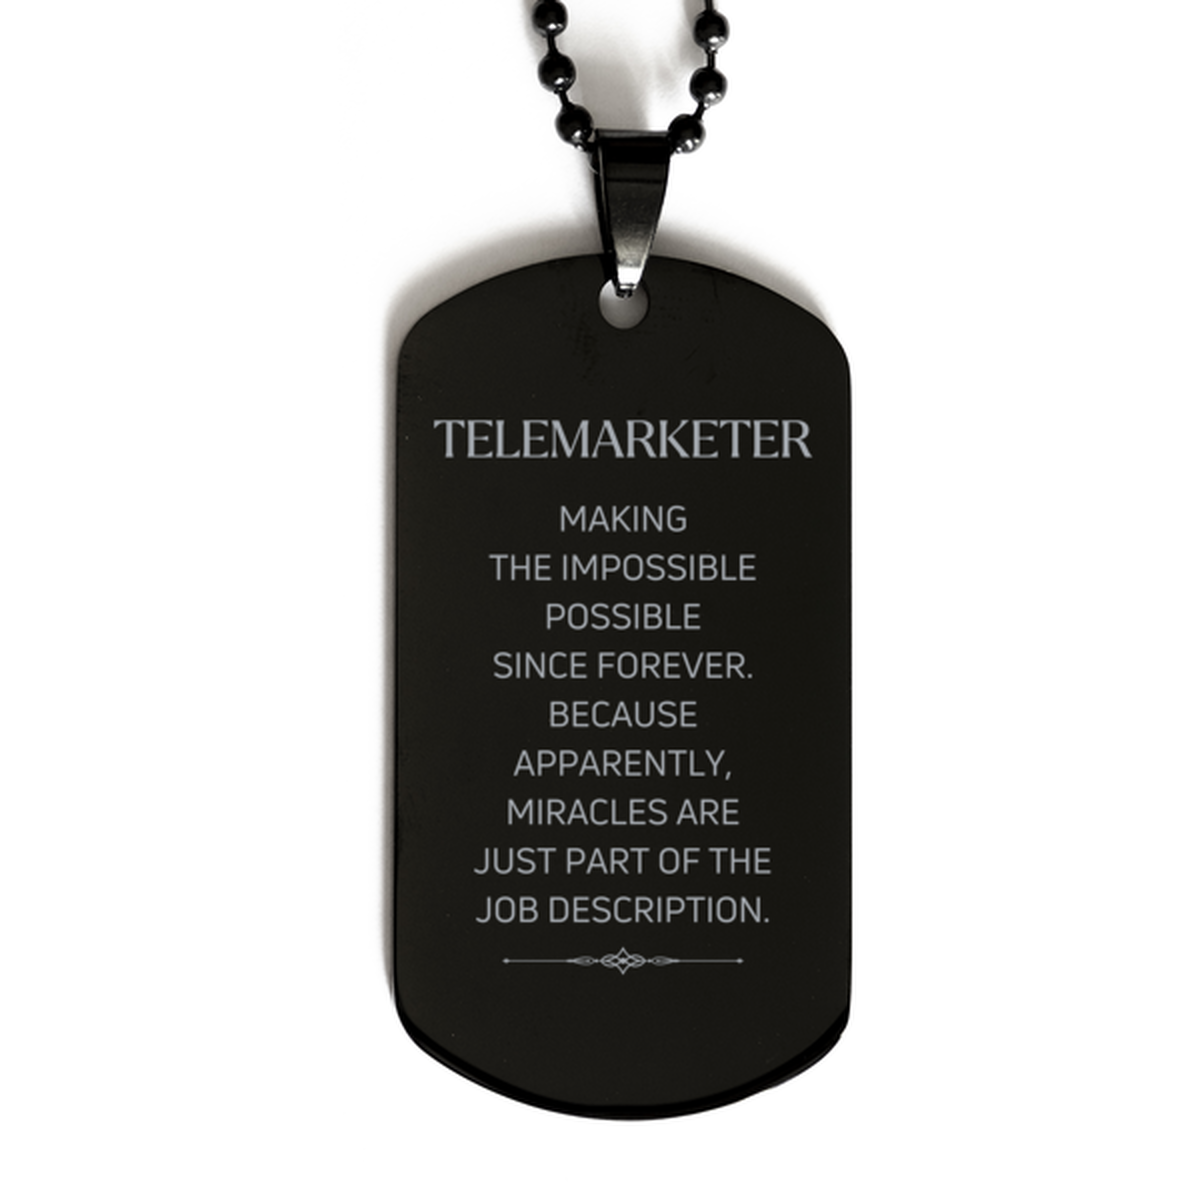 Funny Telemarketer Gifts, Miracles are just part of the job description, Inspirational Birthday Black Dog Tag For Telemarketer, Men, Women, Coworkers, Friends, Boss